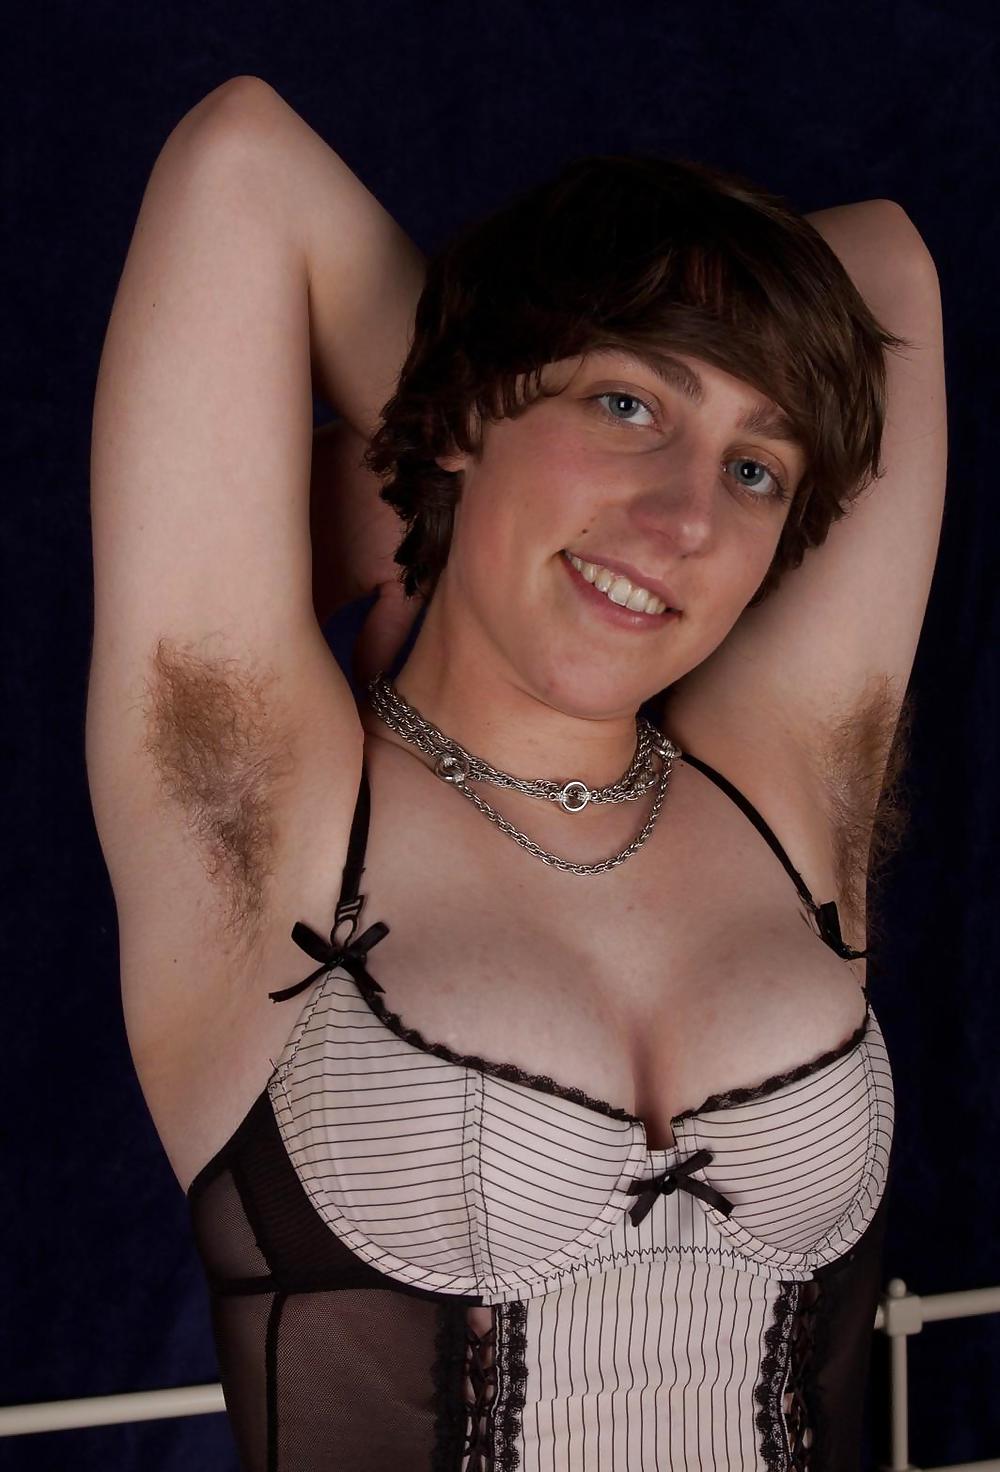 Miscellaneous girls showing hairy, unshaven armpits 1 #36224836